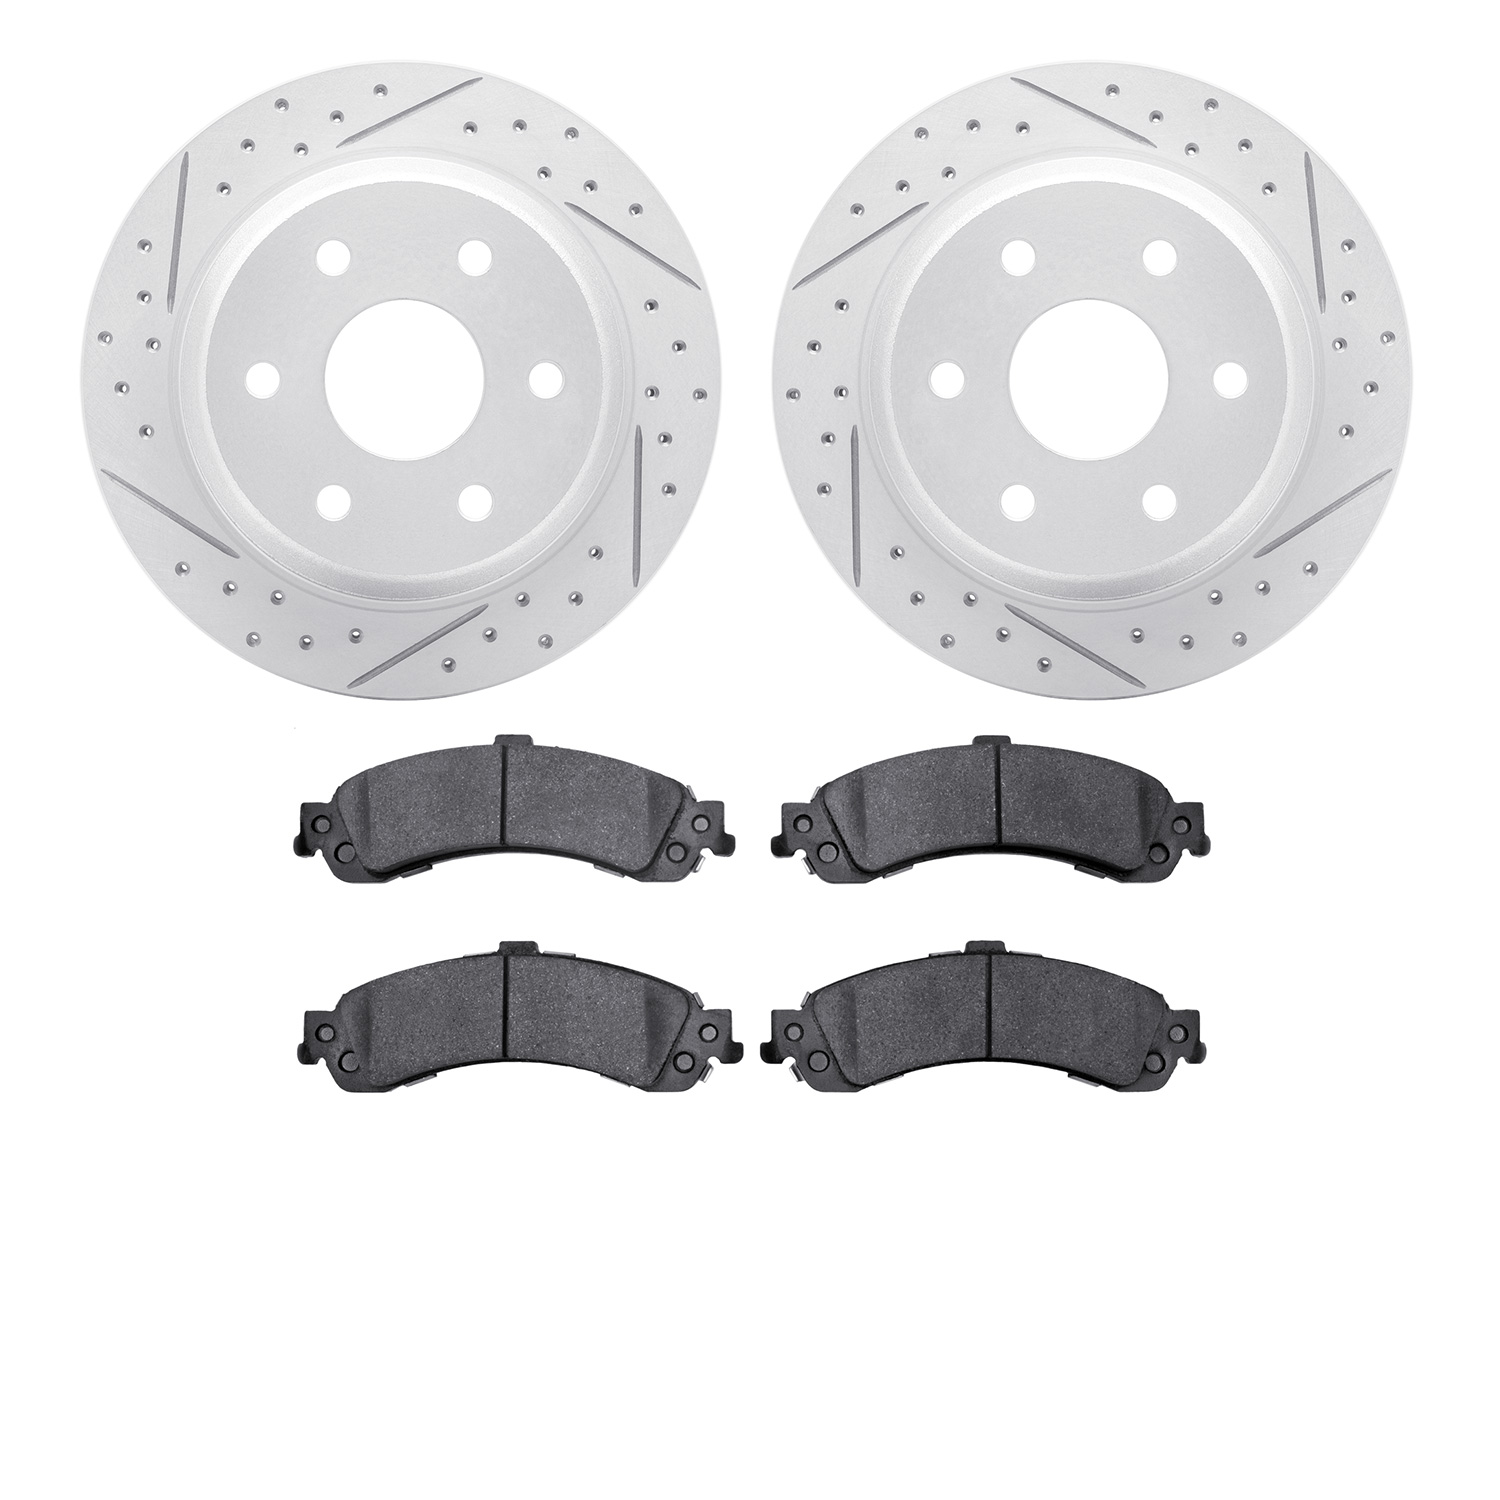 2202-48027 Geoperformance Drilled/Slotted Rotors w/Heavy-Duty Pads Kit, 2000-2006 GM, Position: Rear